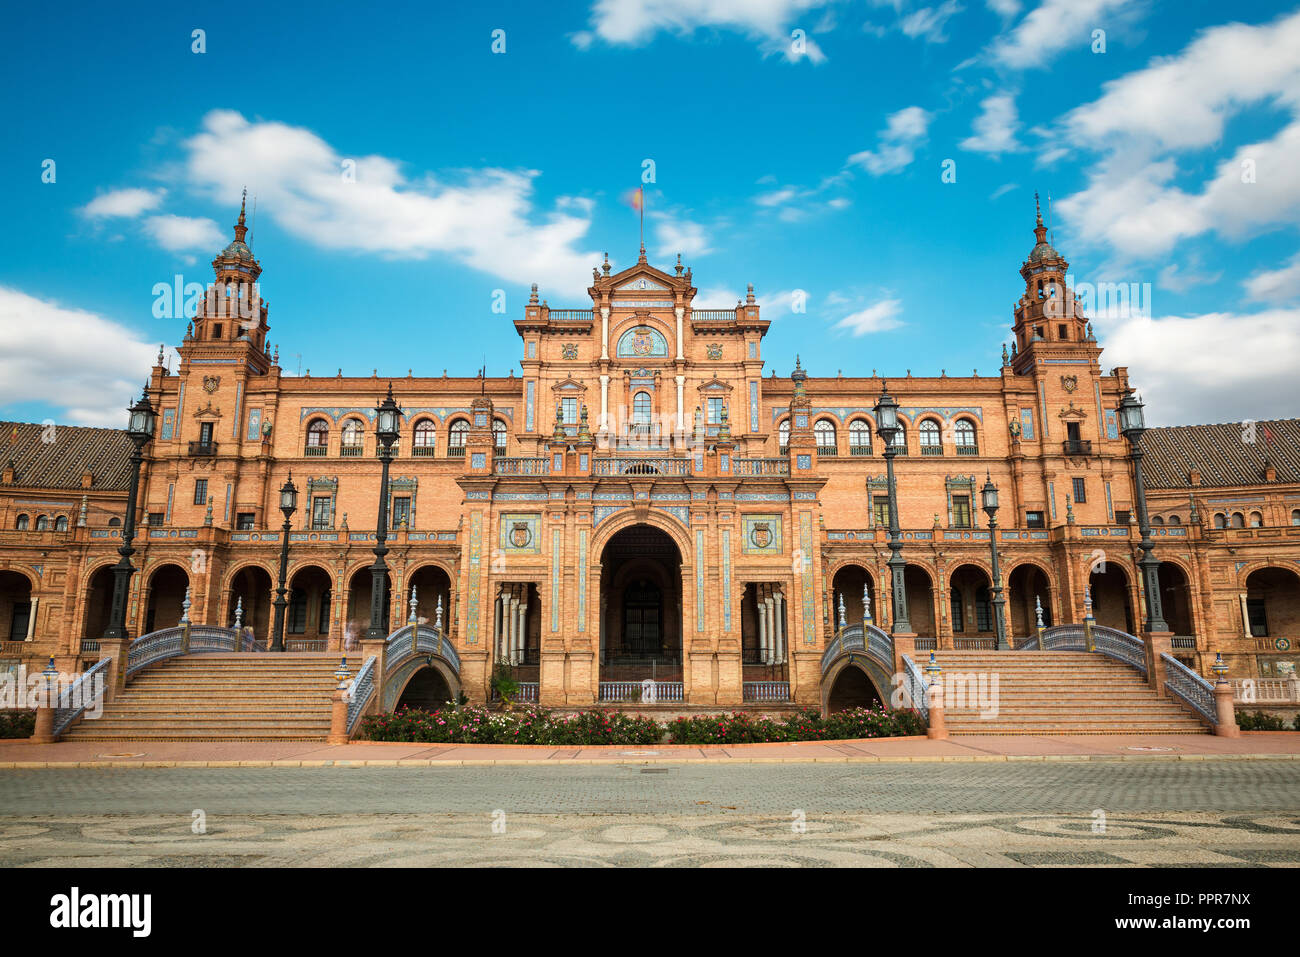 Wide-angle view of the Plaza de España in Seville, Spain, a square built in 1928 for the Ibero-Amercian Exposition of 1929 in Regionalism style. Stock Photo